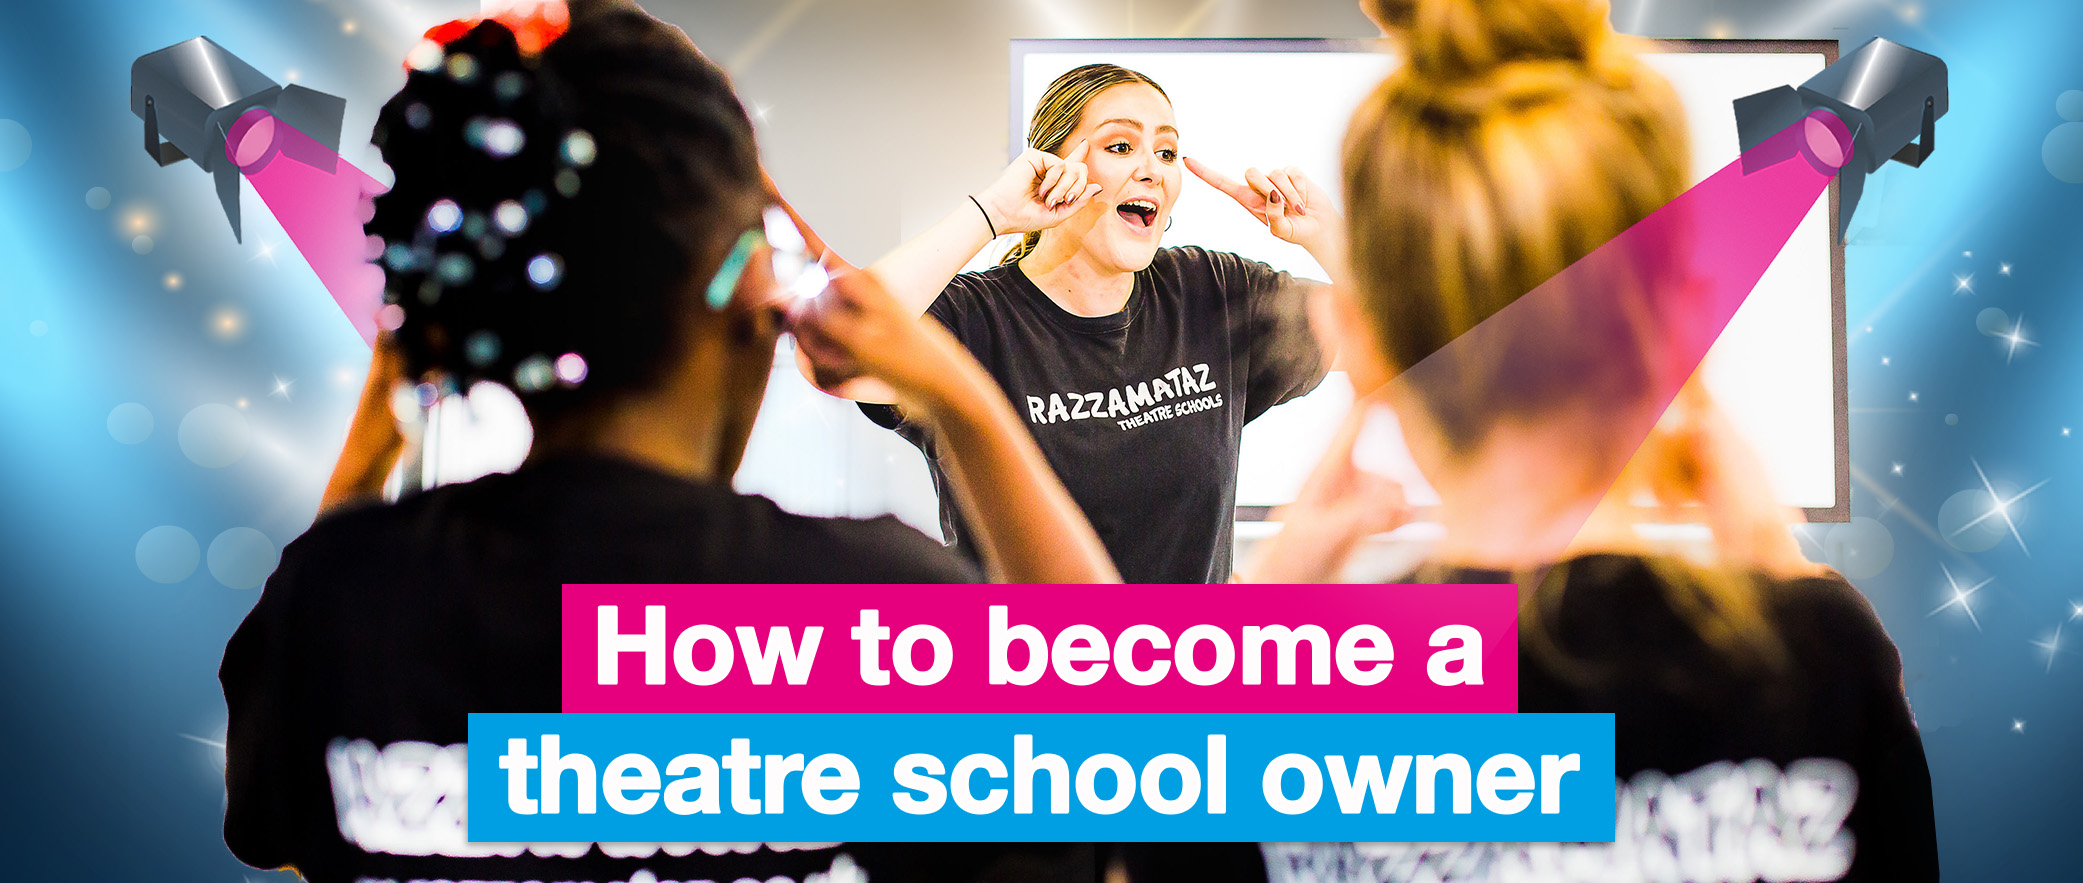 How to become a theatre school owner